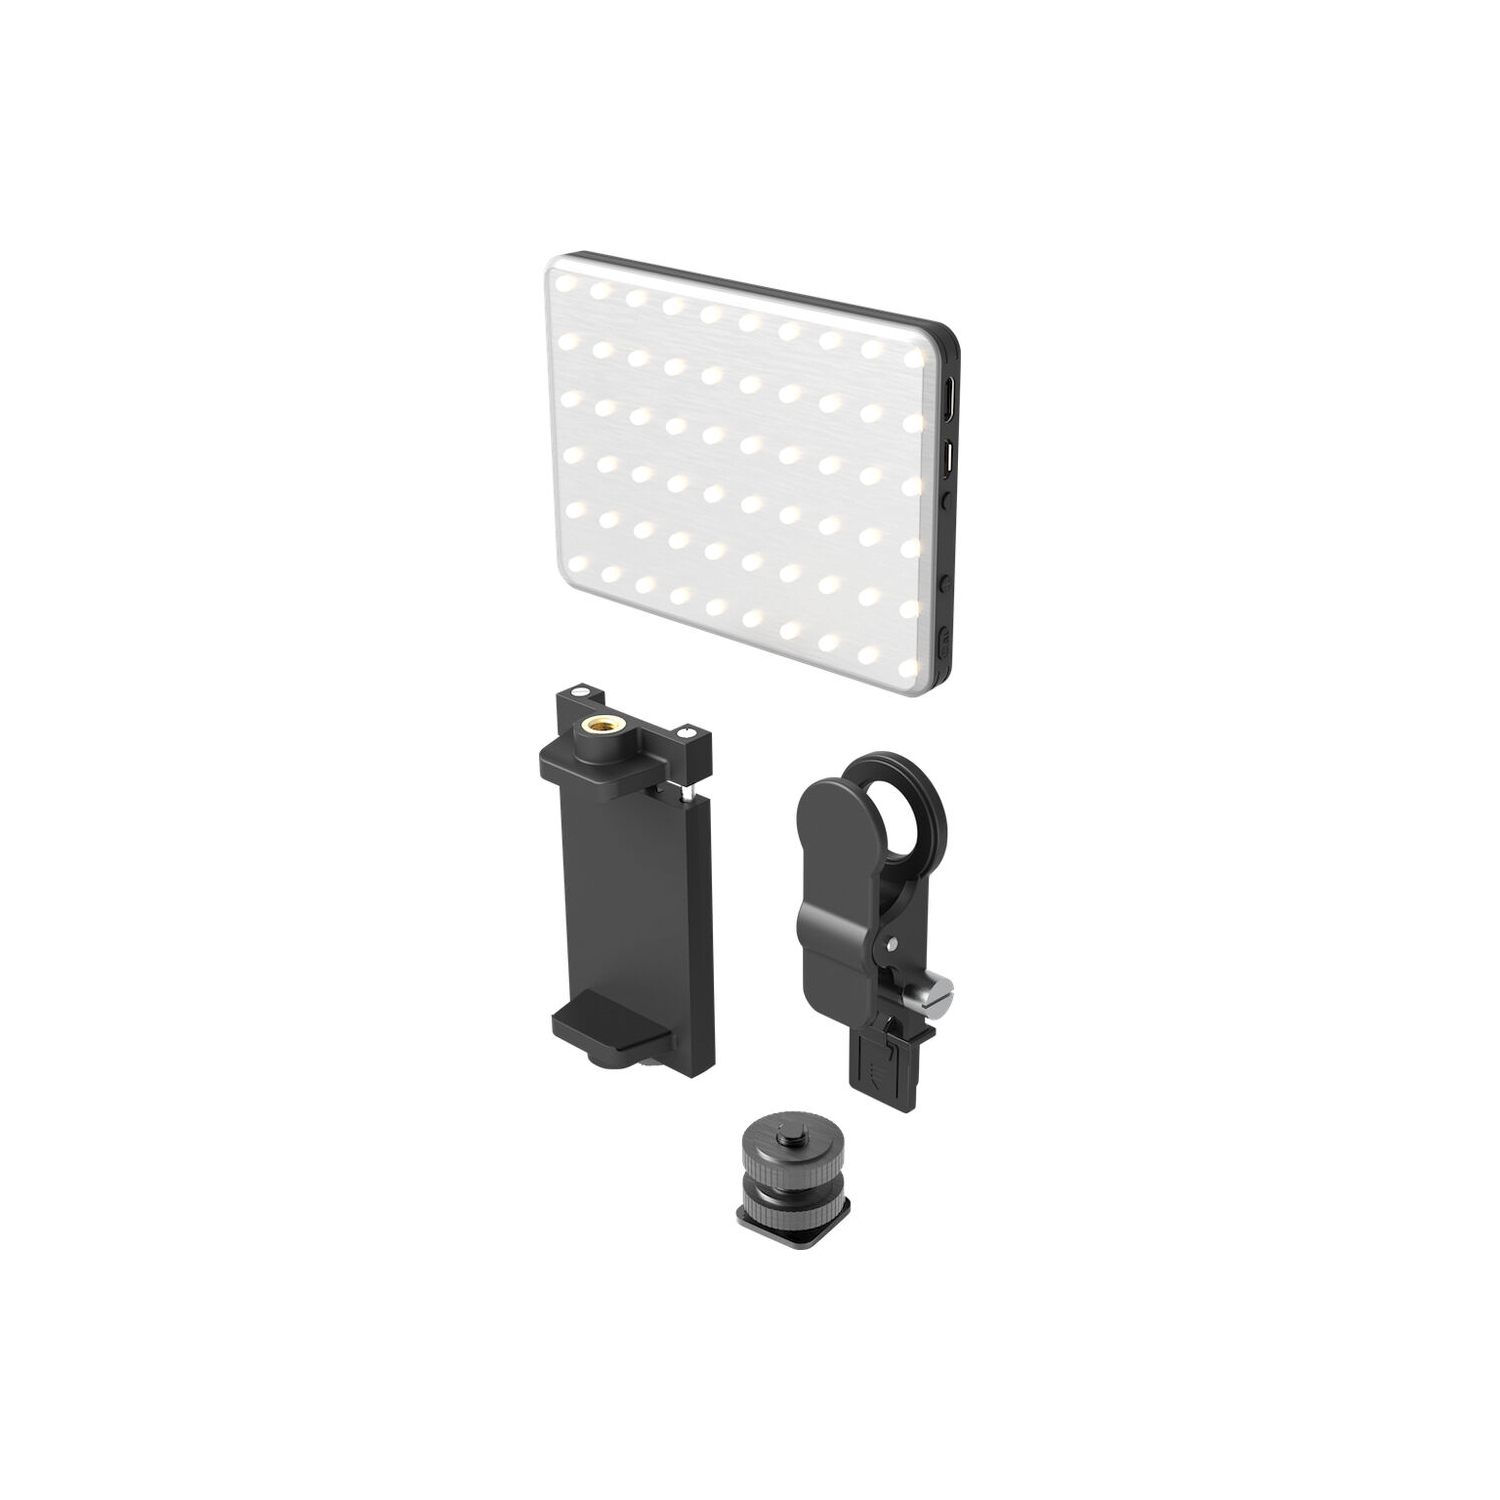 Digipower GoViral - The Influencer - Compact 60 LED Video Light